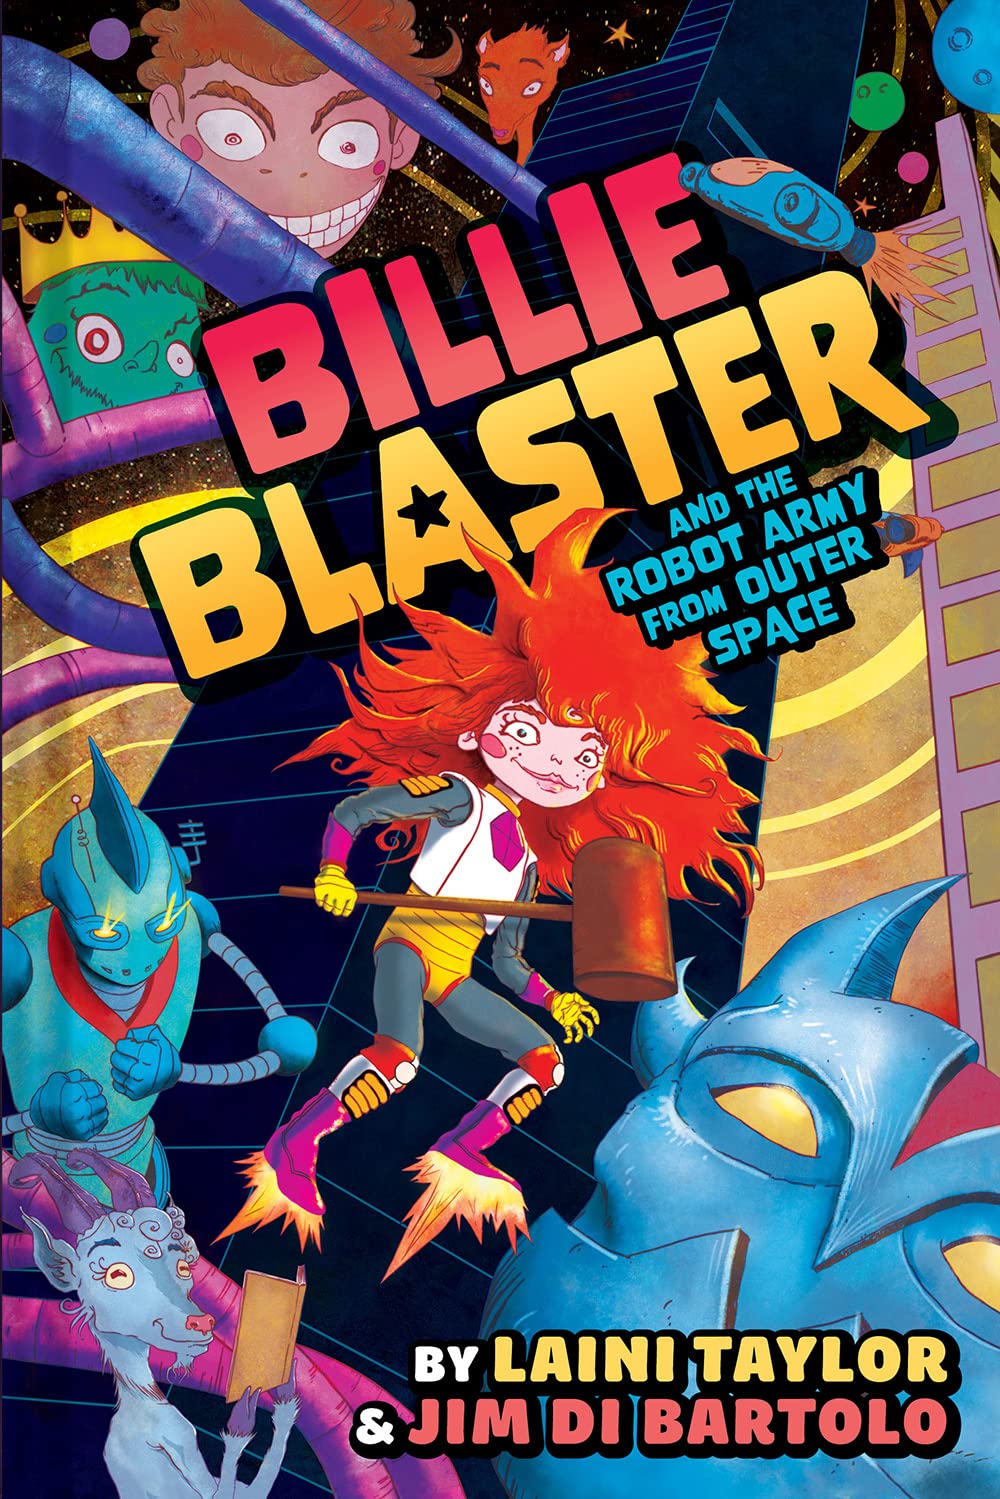 Billie Blaster And The Army From Outer Space